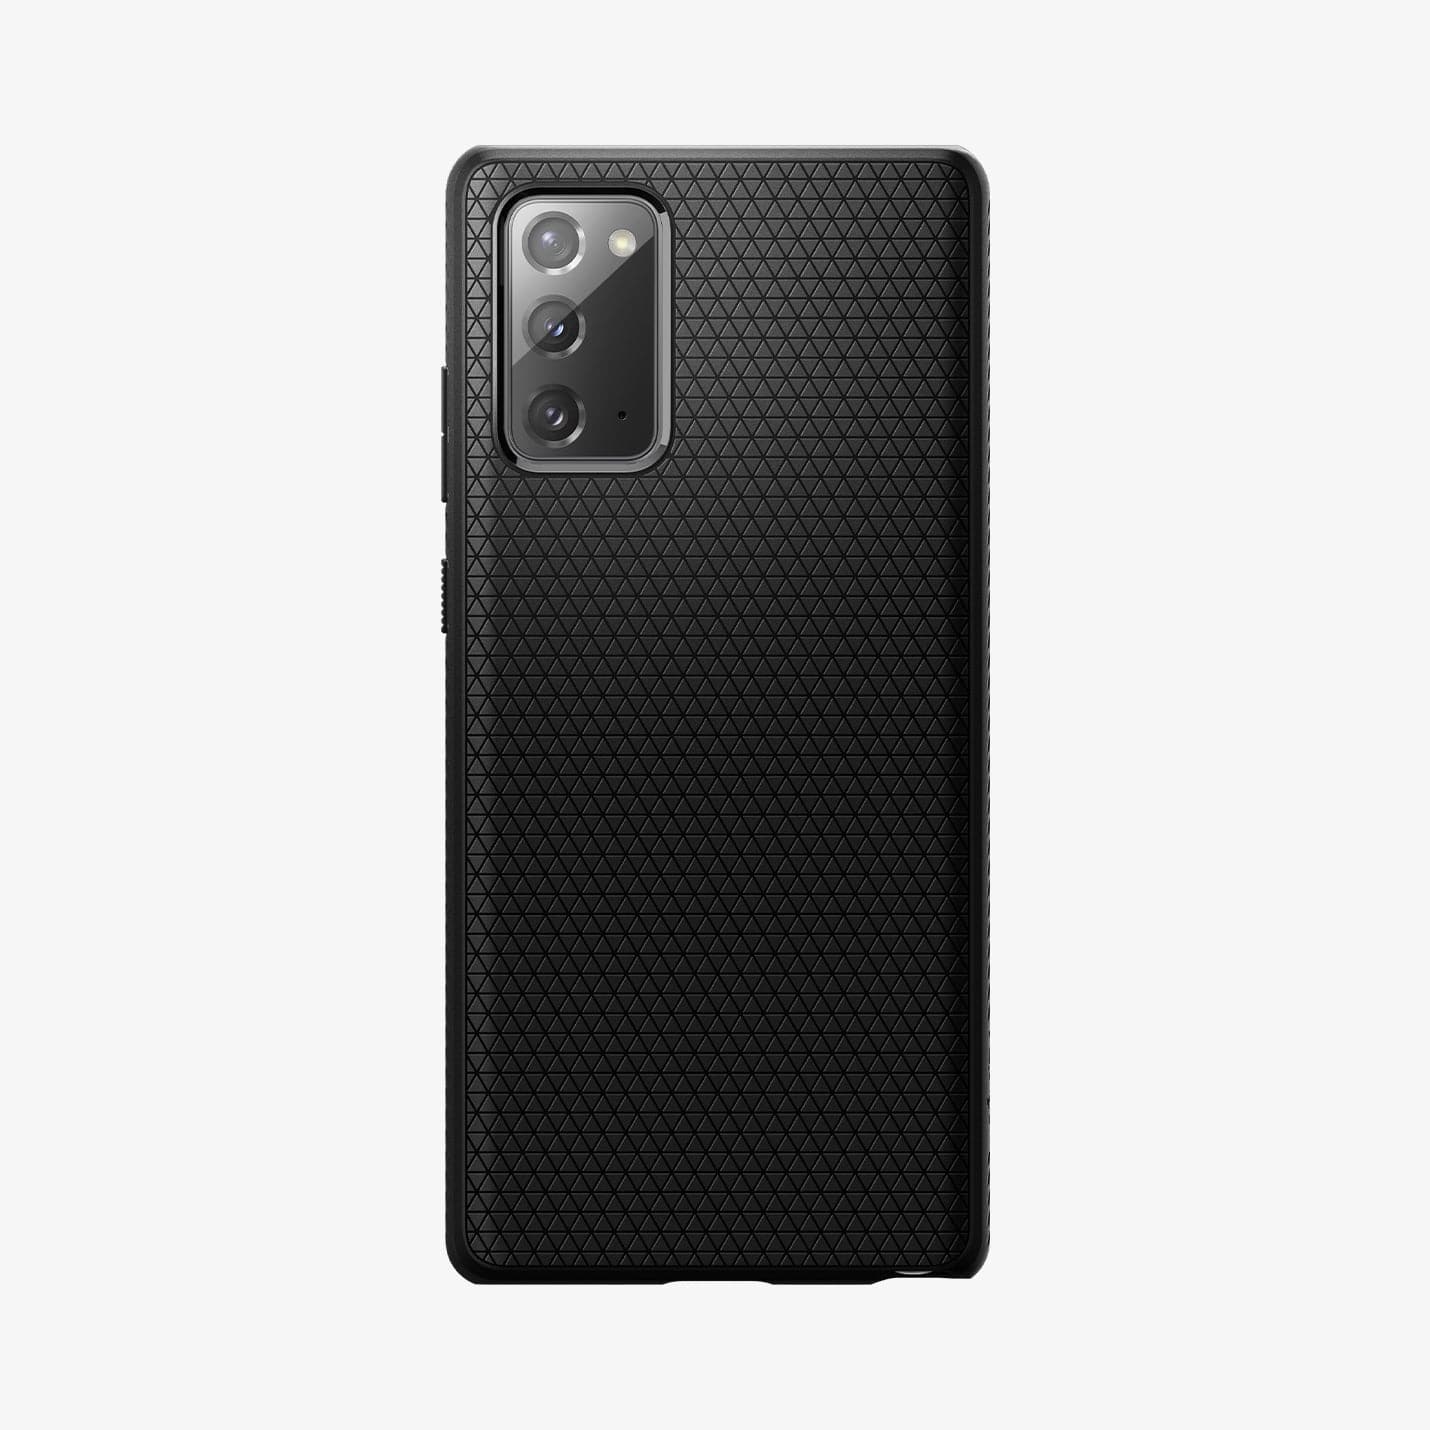 ACS01418 - Galaxy Note 20 Liquid Air Case in matte black showing the back